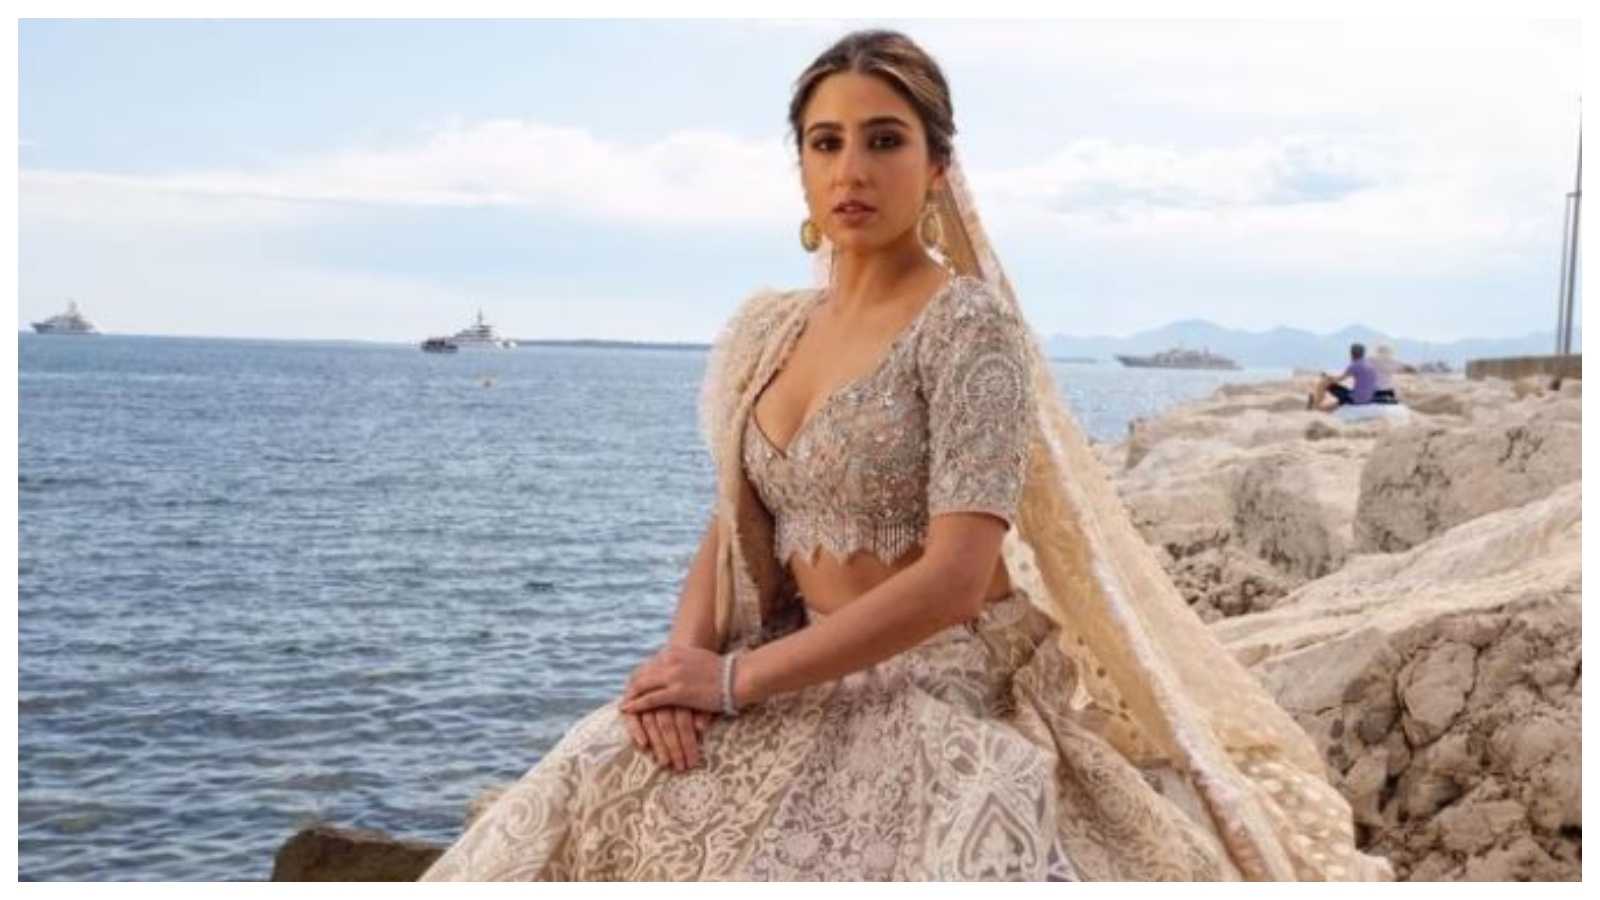 Sara Ali Khan desires to walk Cannes red carpet with THIS Hollywood actor